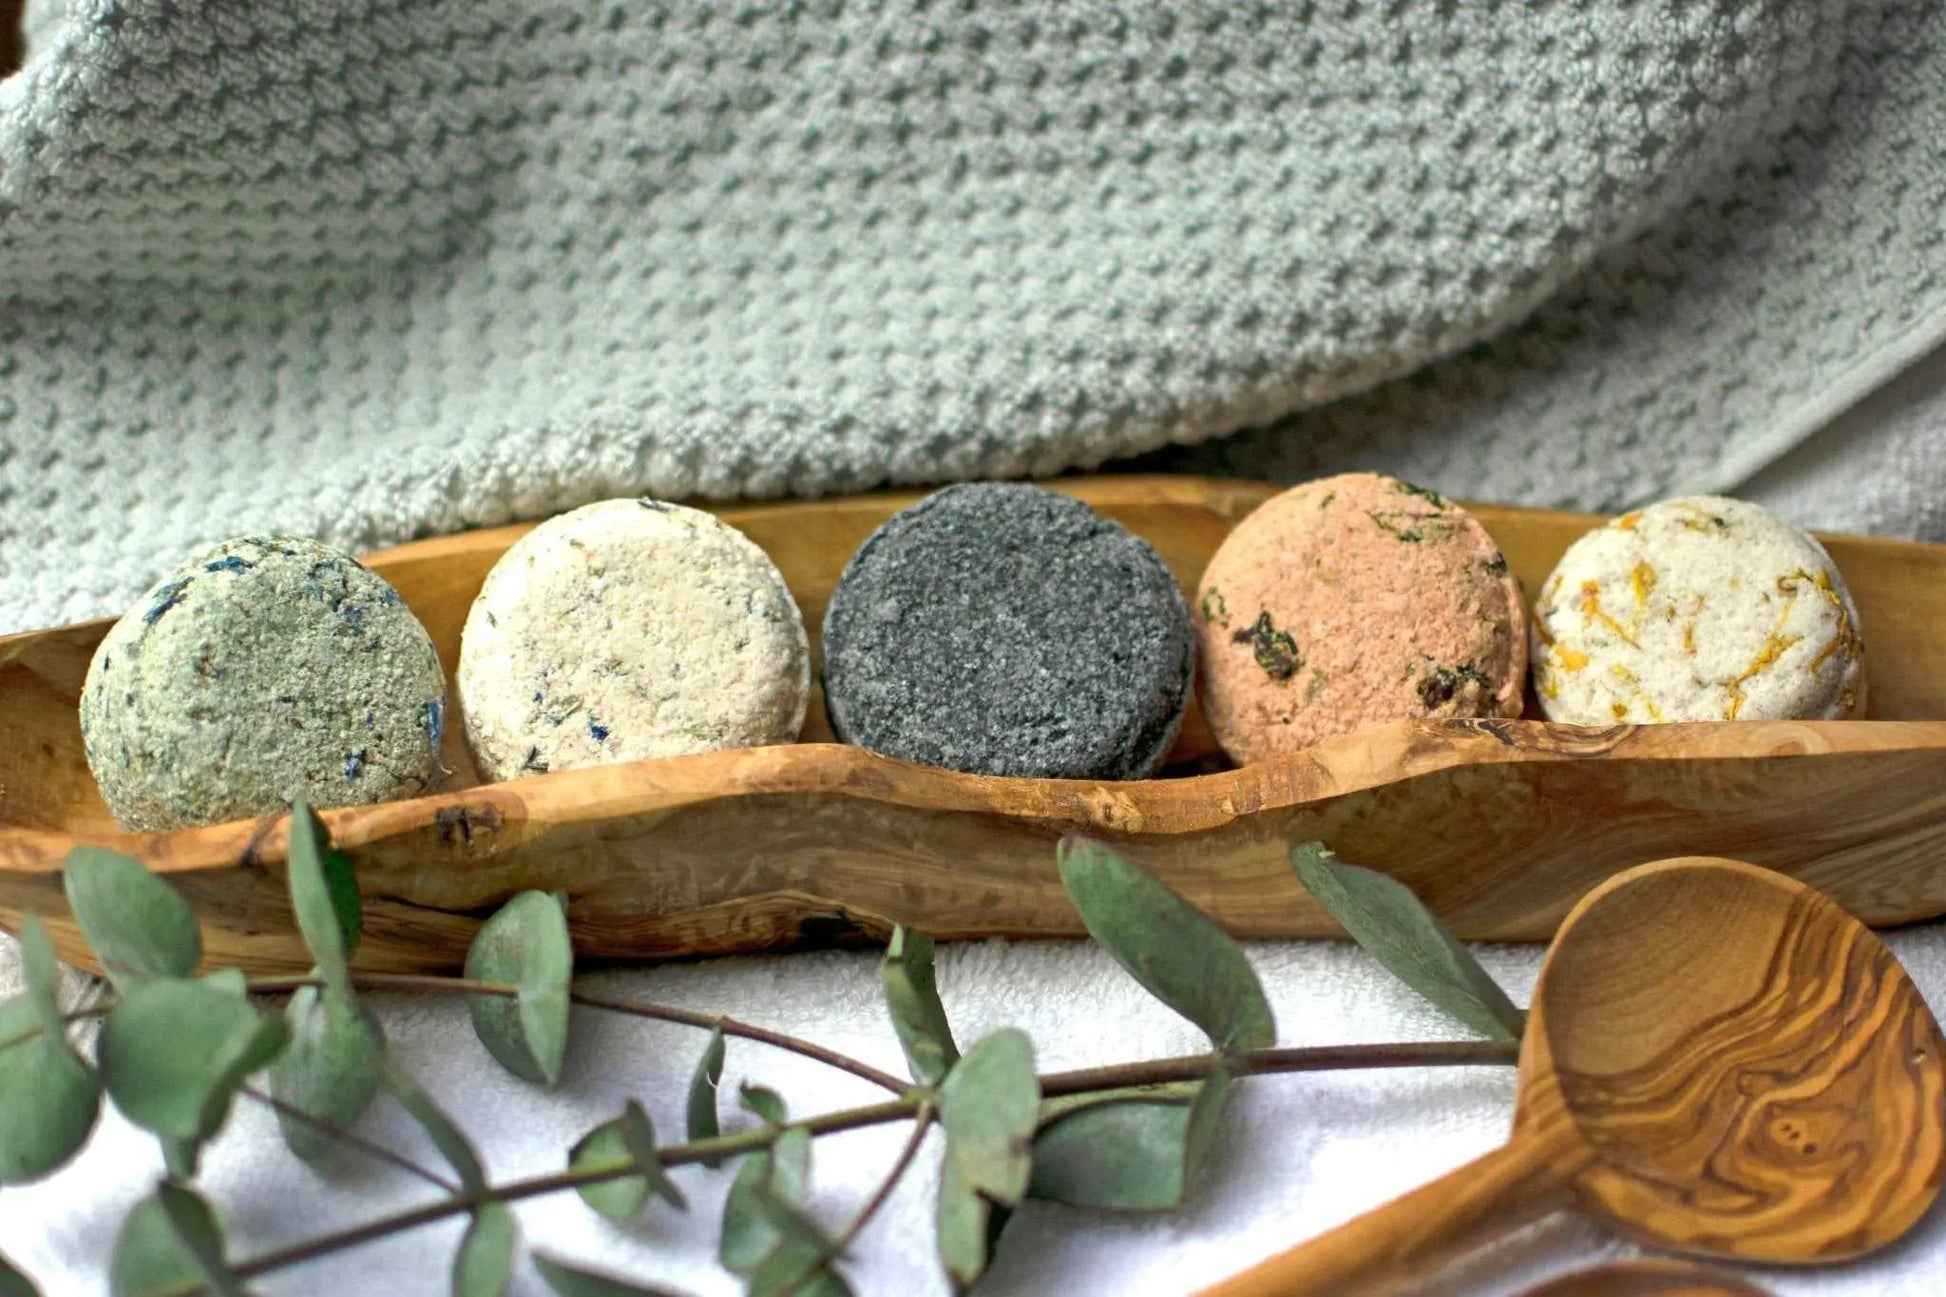 five Natural vegan bath soaks in a wooden dish with towels and botanicals